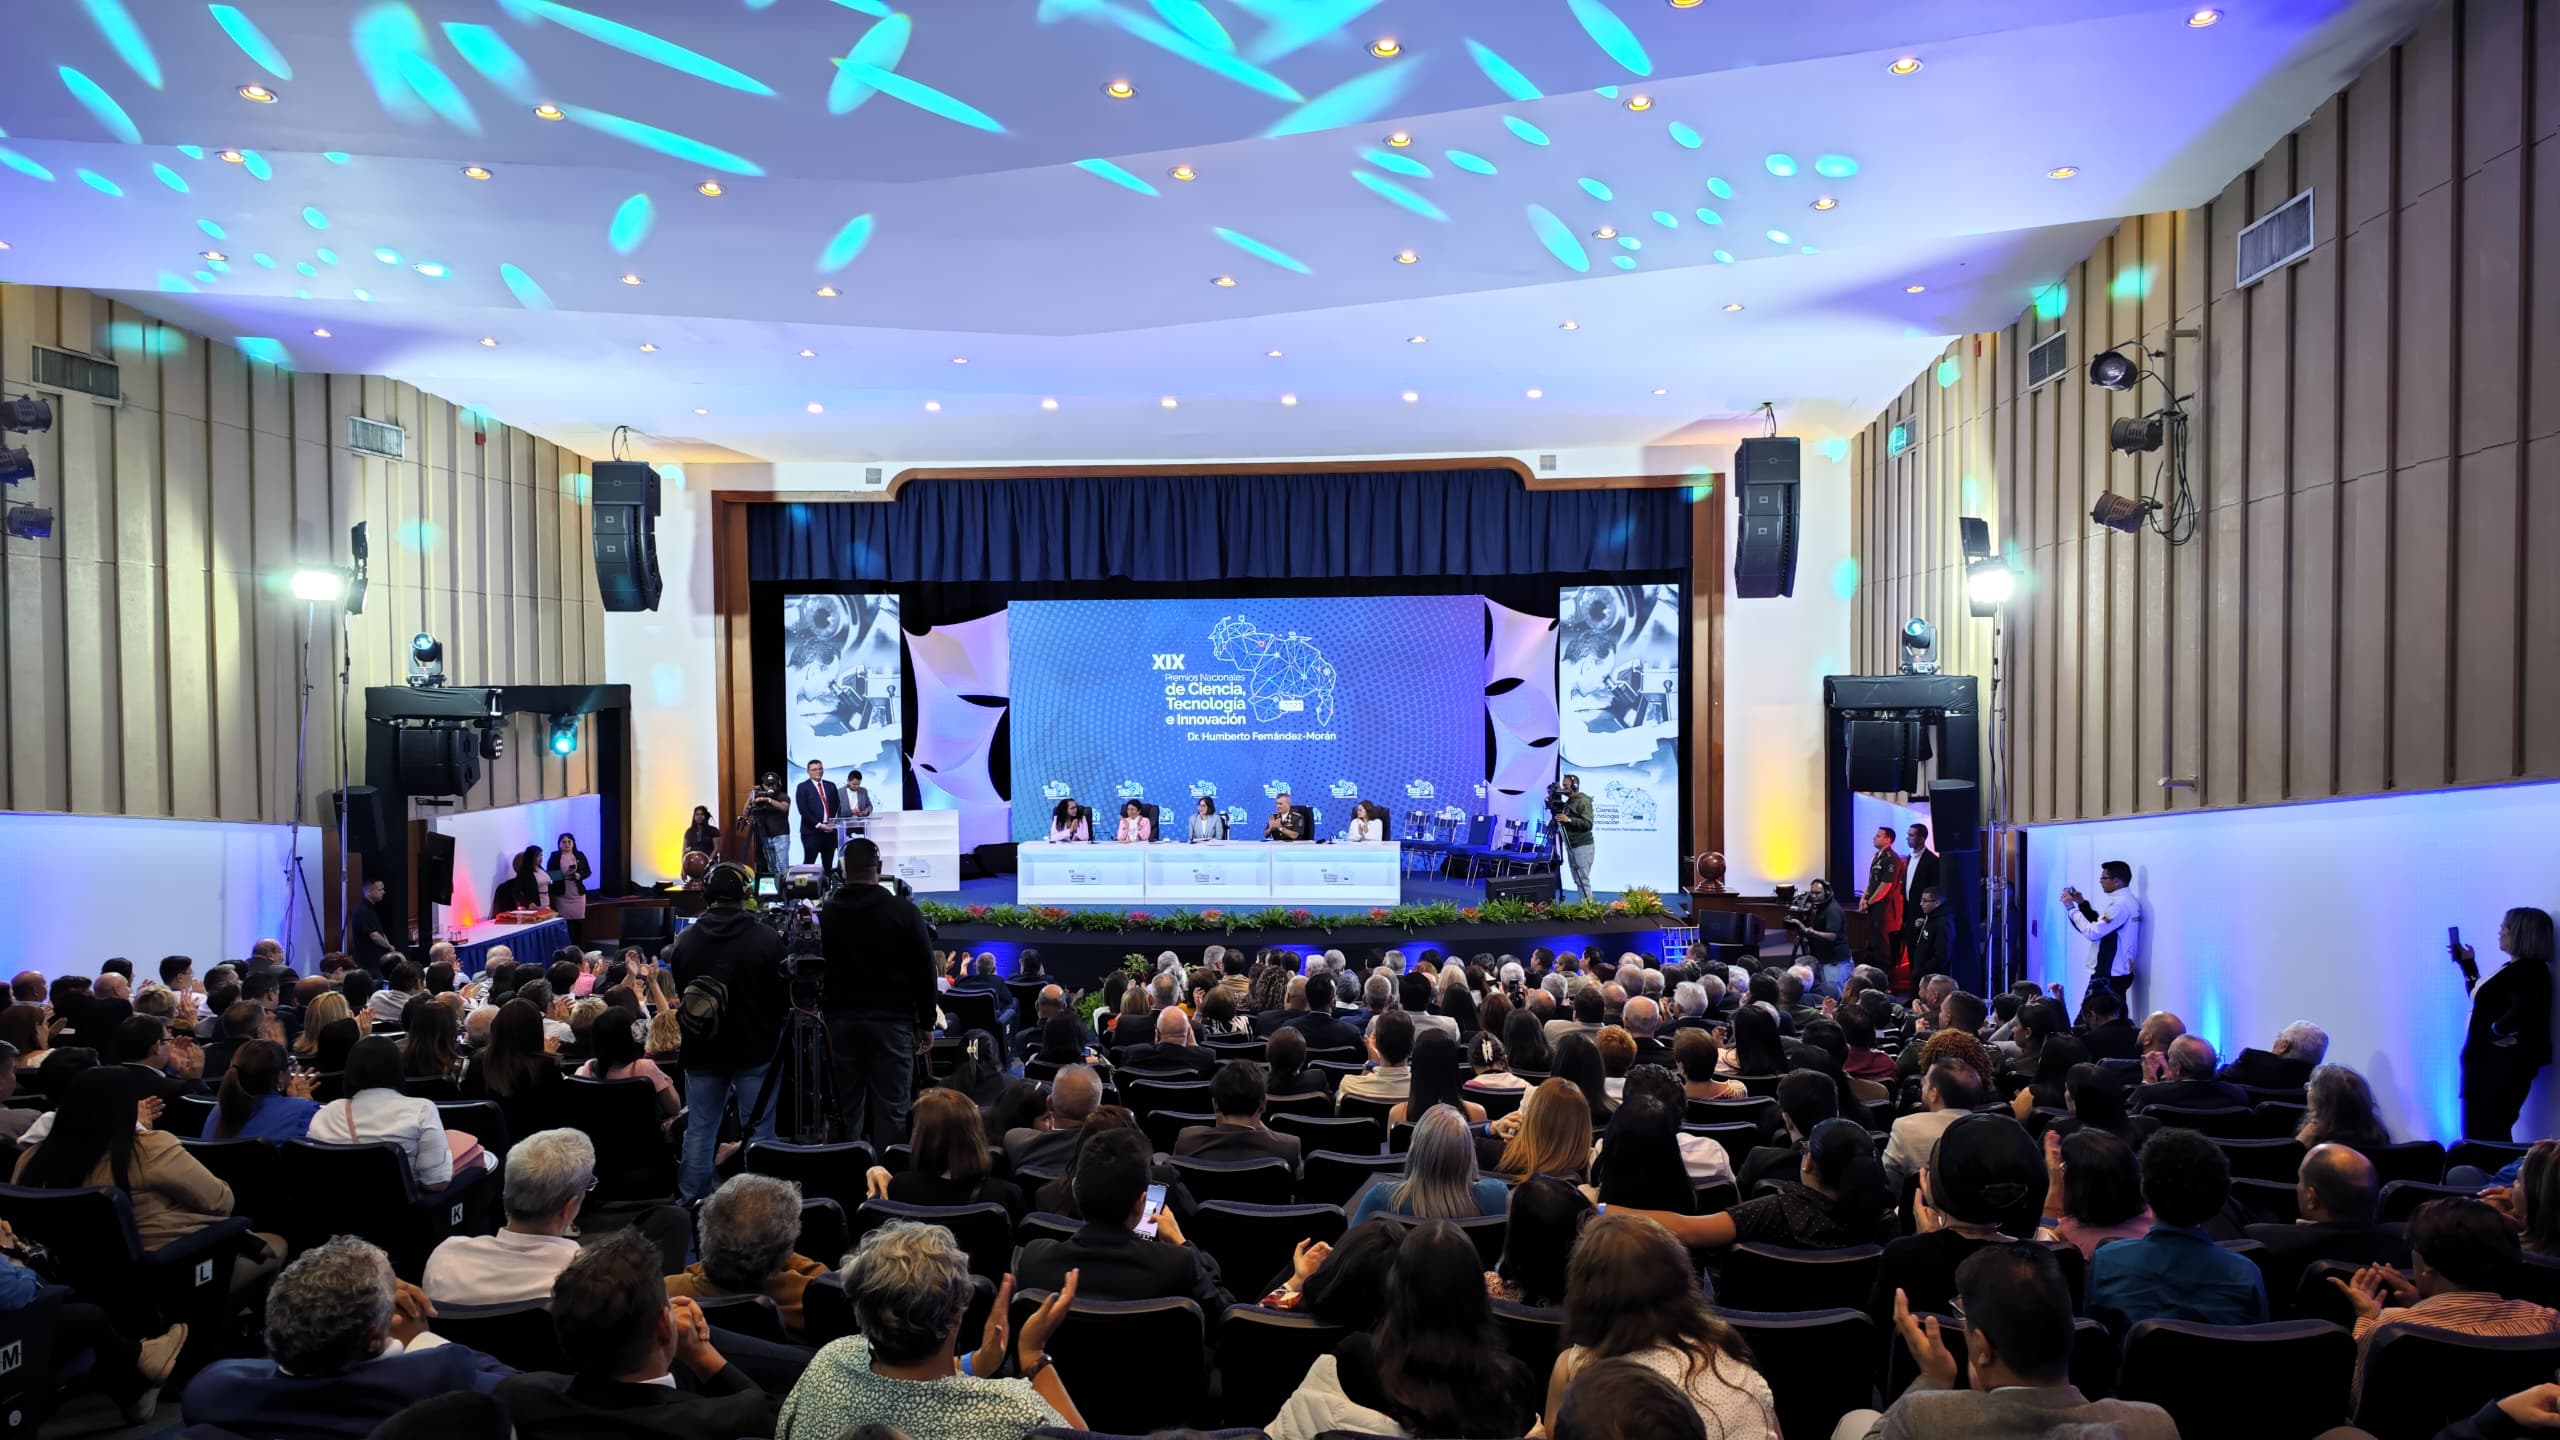 The 2023 National Science, Technology and Innovation Awards Ceremony was held successfully